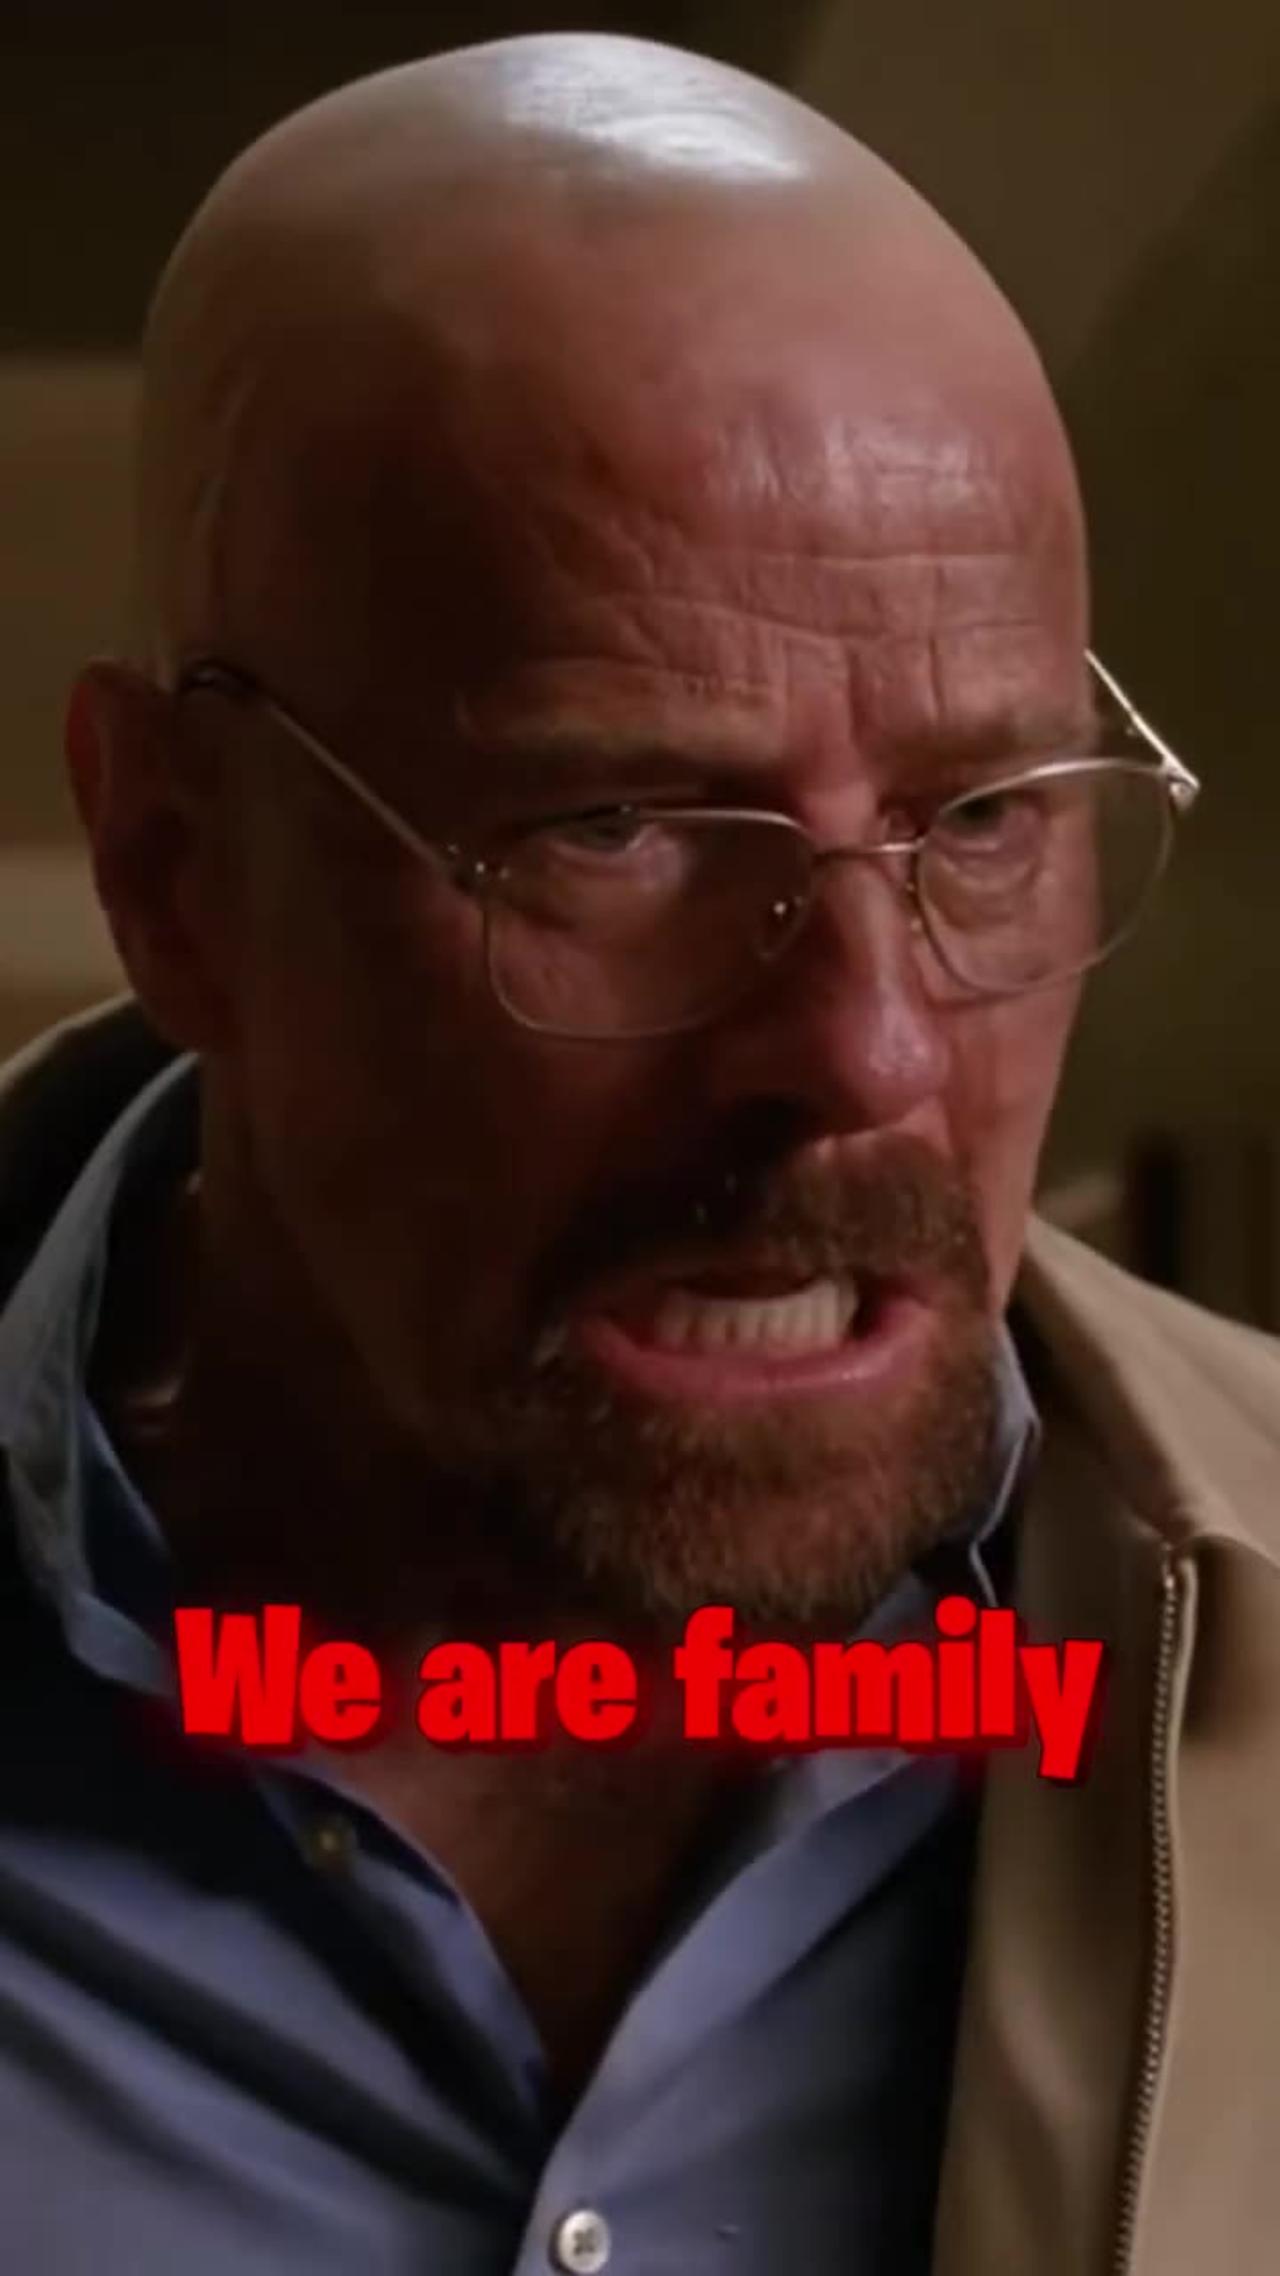 We Are Family 👪 💔😞 |  Breaking Bad #shorts